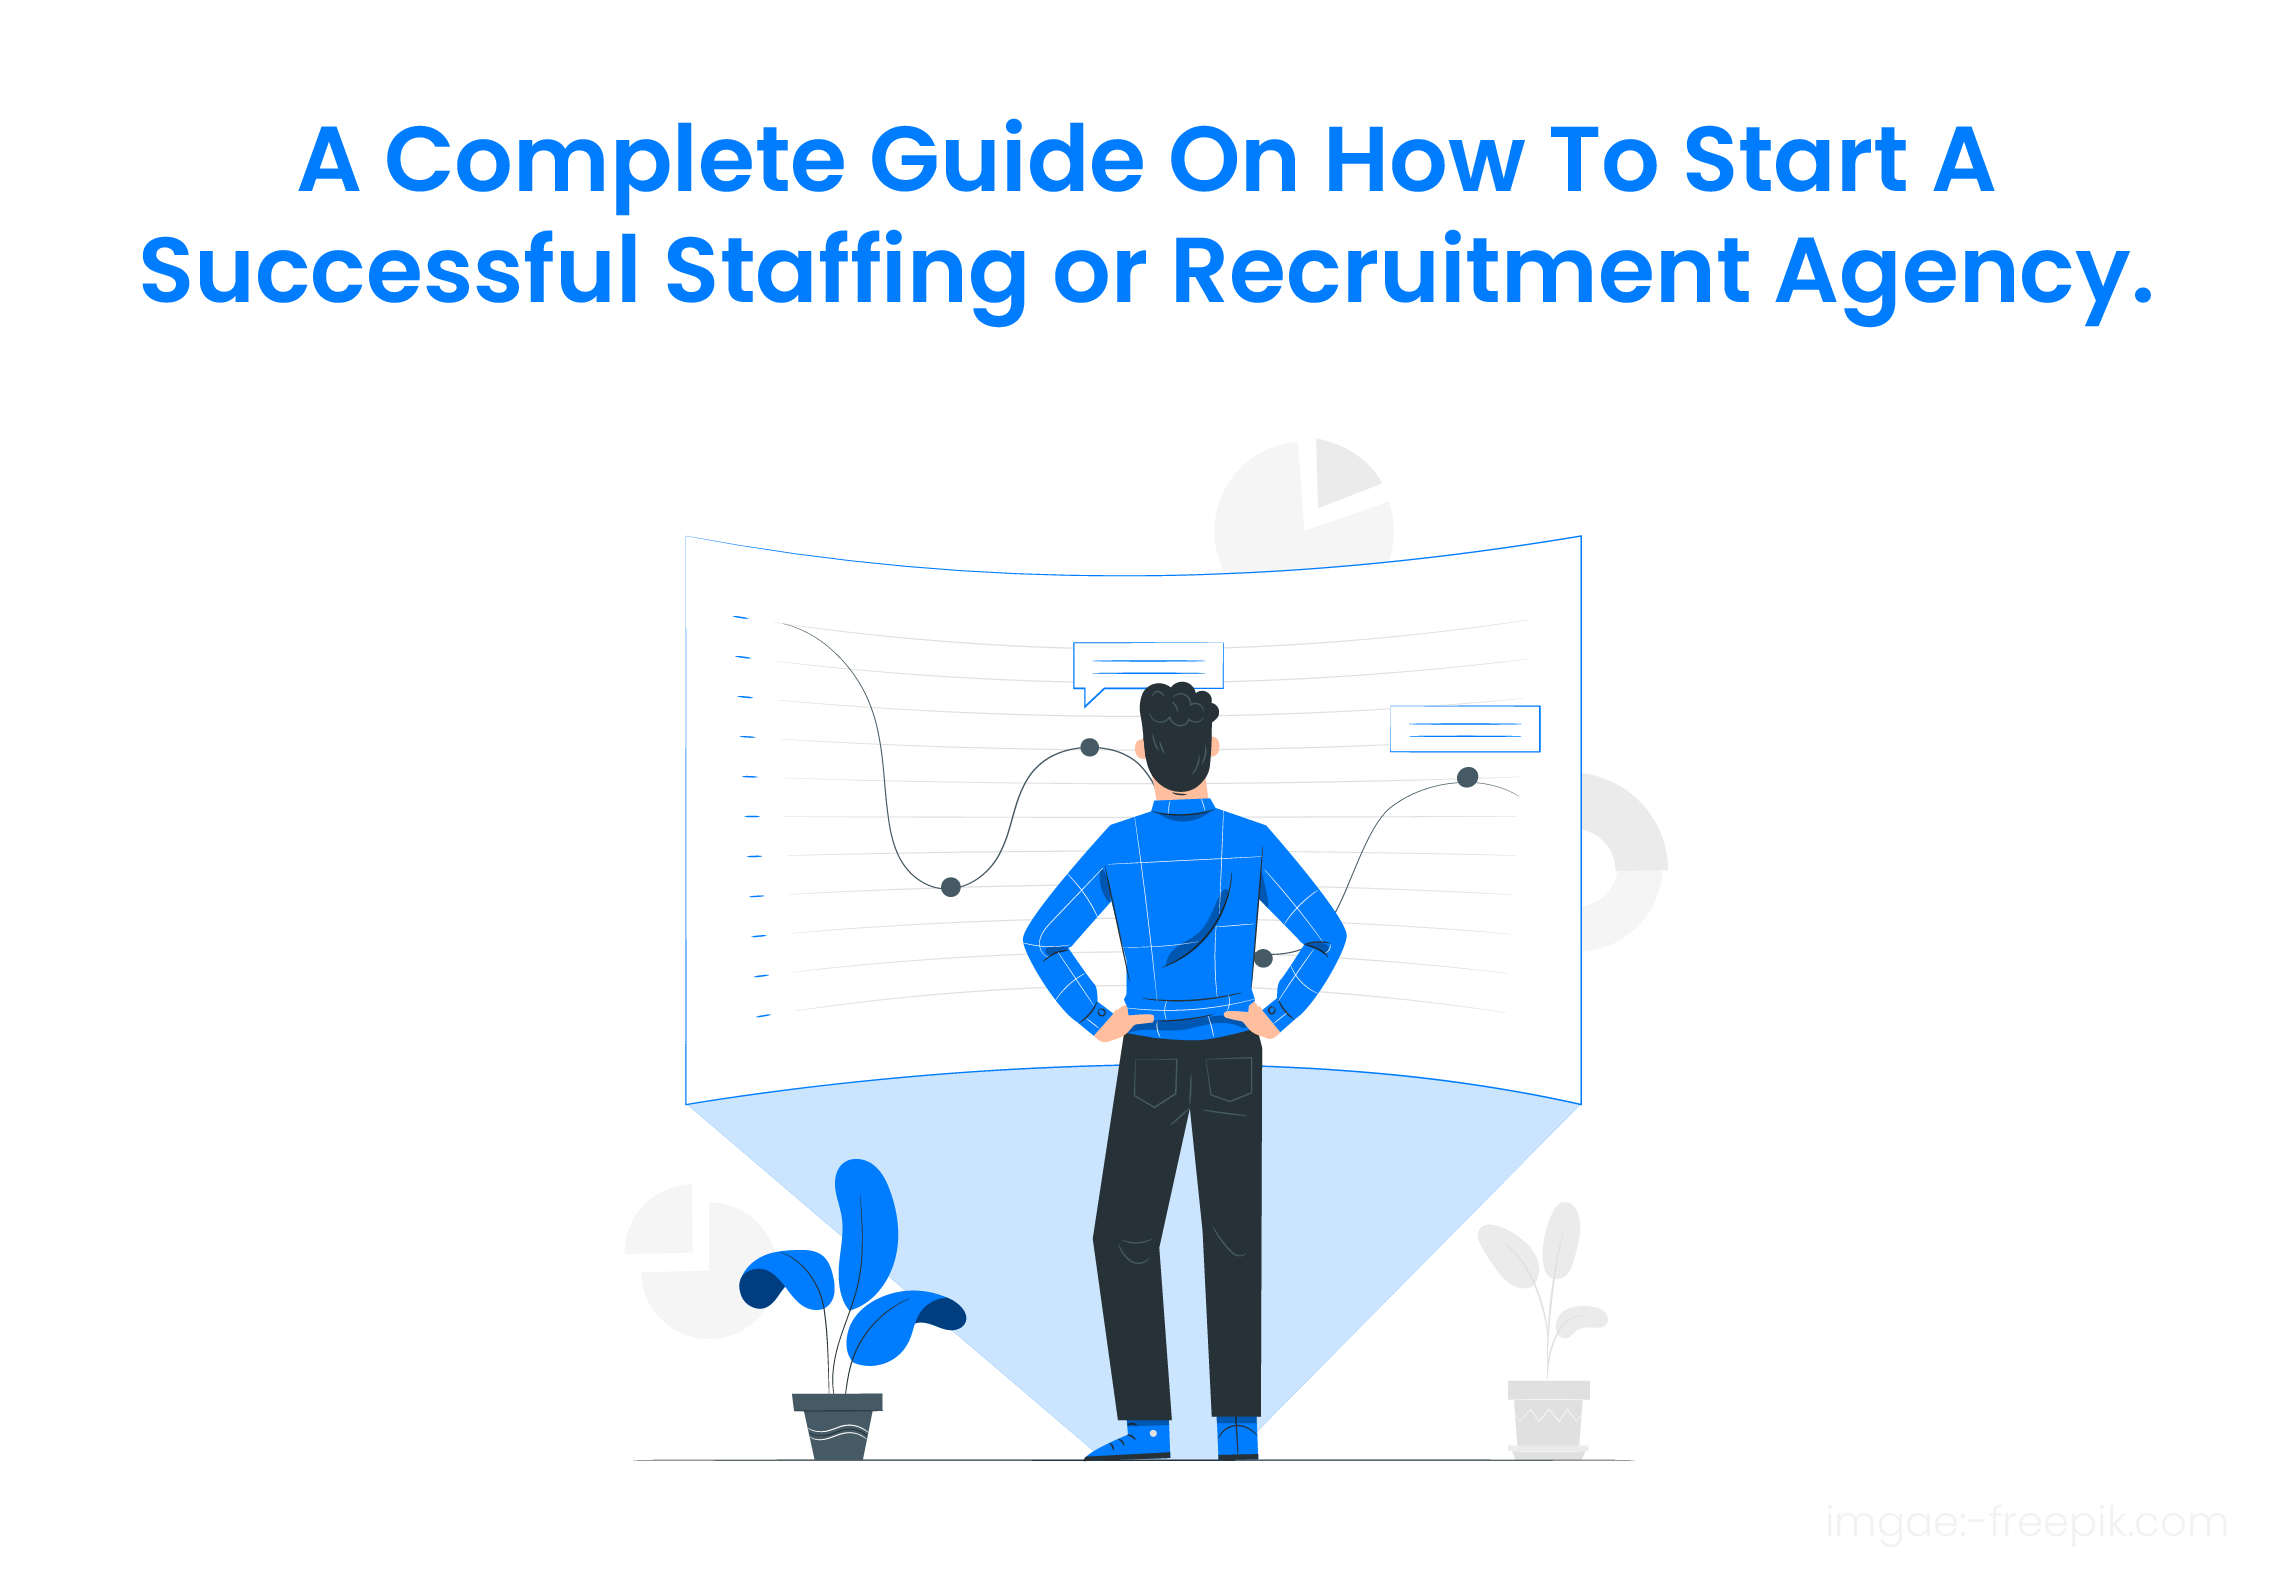 Successful Staffing or Recruitment Agency